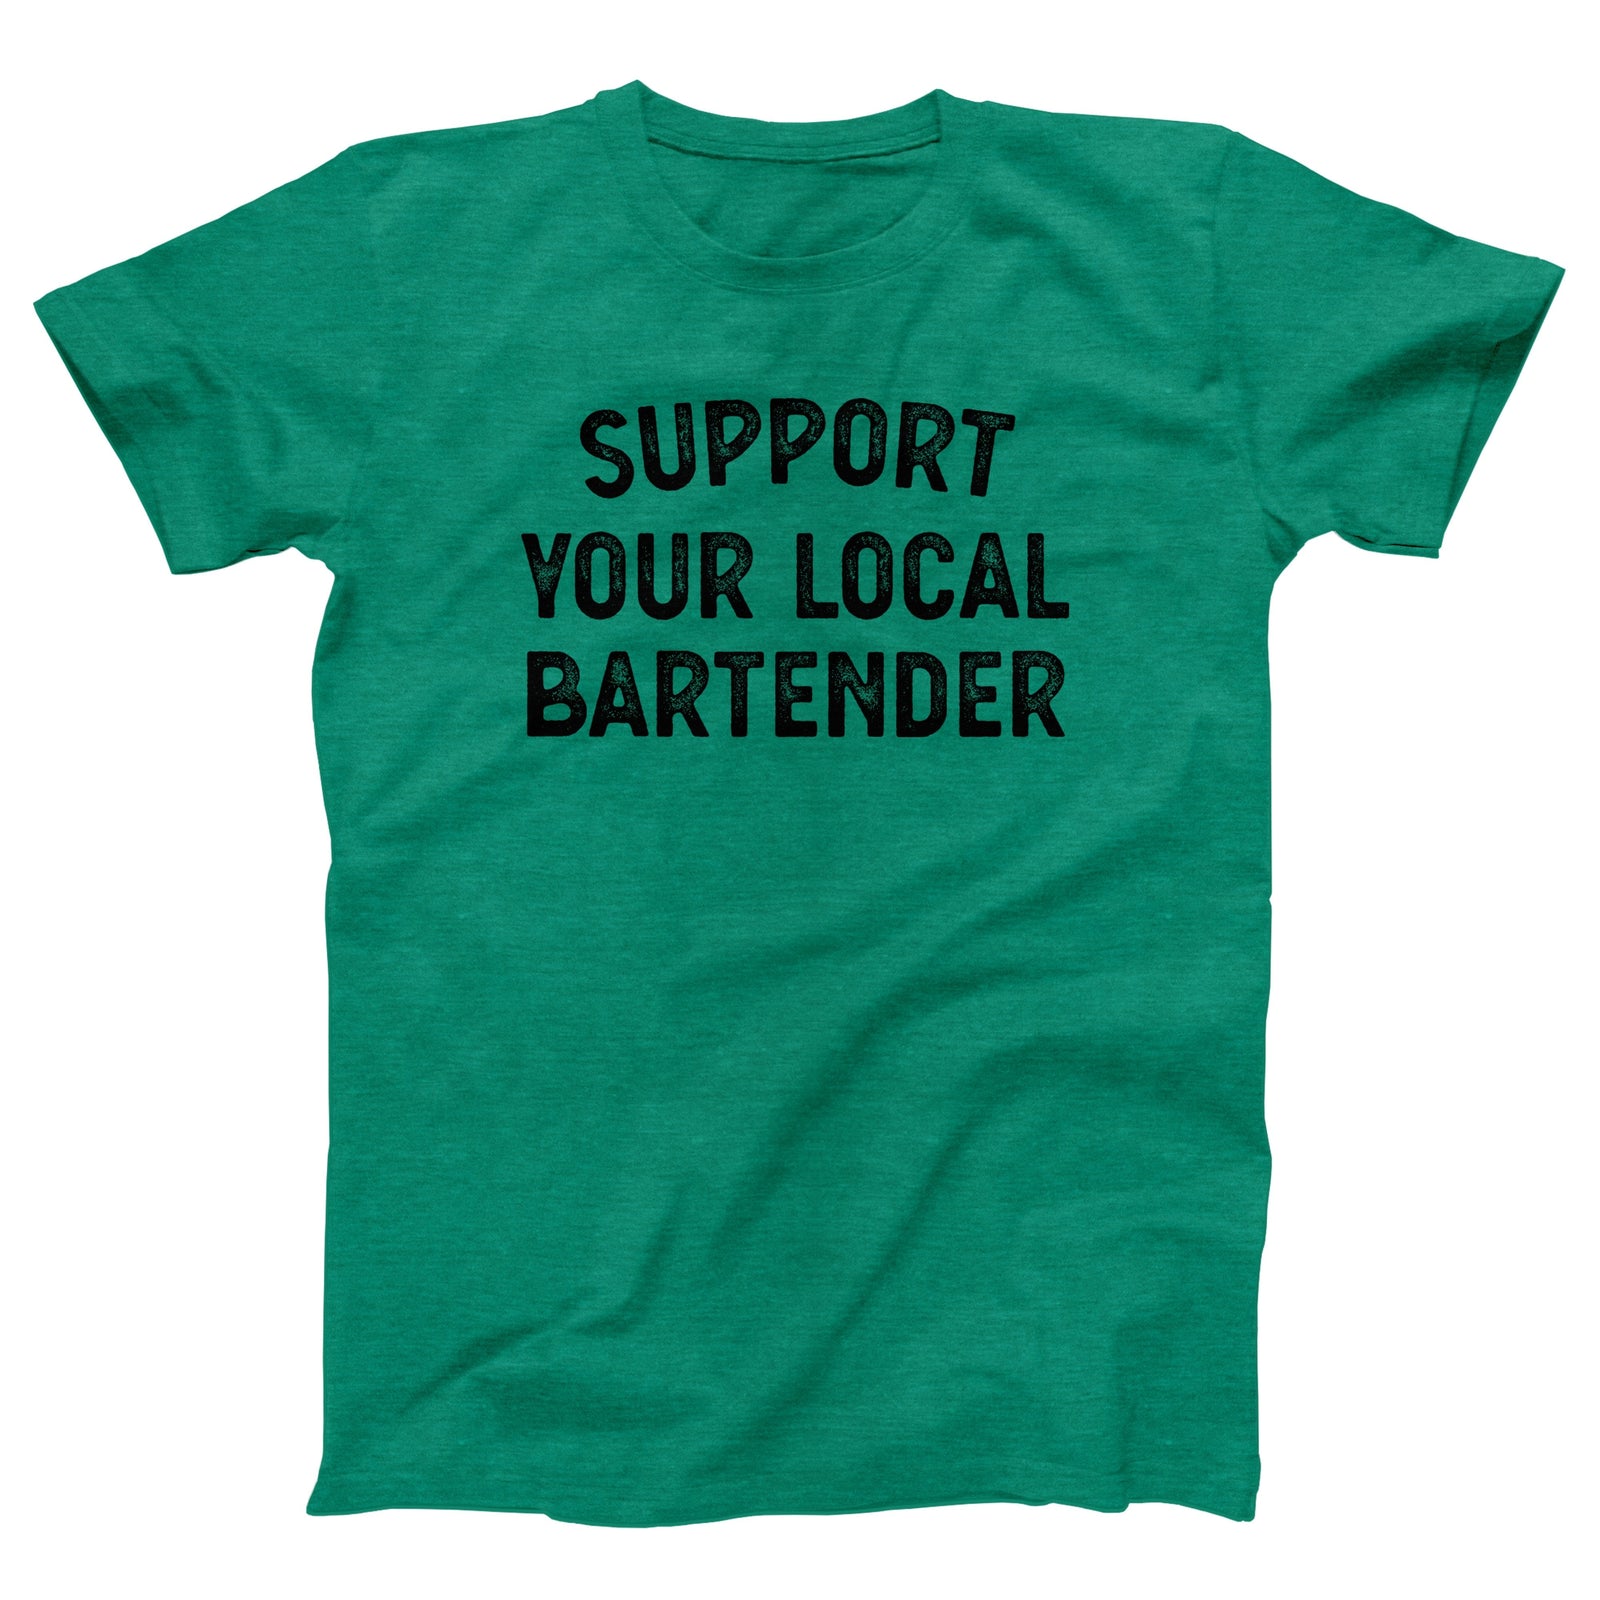 //cdn.shopify.com/s/files/1/0274/2488/2766/products/support-your-local-bartender-adult-unisex-t-shirt-499364_5000x.jpg?v=1675243177 5000w,
    //cdn.shopify.com/s/files/1/0274/2488/2766/products/support-your-local-bartender-adult-unisex-t-shirt-499364_4500x.jpg?v=1675243177 4500w,
    //cdn.shopify.com/s/files/1/0274/2488/2766/products/support-your-local-bartender-adult-unisex-t-shirt-499364_4000x.jpg?v=1675243177 4000w,
    //cdn.shopify.com/s/files/1/0274/2488/2766/products/support-your-local-bartender-adult-unisex-t-shirt-499364_3500x.jpg?v=1675243177 3500w,
    //cdn.shopify.com/s/files/1/0274/2488/2766/products/support-your-local-bartender-adult-unisex-t-shirt-499364_3000x.jpg?v=1675243177 3000w,
    //cdn.shopify.com/s/files/1/0274/2488/2766/products/support-your-local-bartender-adult-unisex-t-shirt-499364_2500x.jpg?v=1675243177 2500w,
    //cdn.shopify.com/s/files/1/0274/2488/2766/products/support-your-local-bartender-adult-unisex-t-shirt-499364_2000x.jpg?v=1675243177 2000w,
    //cdn.shopify.com/s/files/1/0274/2488/2766/products/support-your-local-bartender-adult-unisex-t-shirt-499364_1800x.jpg?v=1675243177 1800w,
    //cdn.shopify.com/s/files/1/0274/2488/2766/products/support-your-local-bartender-adult-unisex-t-shirt-499364_1600x.jpg?v=1675243177 1600w,
    //cdn.shopify.com/s/files/1/0274/2488/2766/products/support-your-local-bartender-adult-unisex-t-shirt-499364_1400x.jpg?v=1675243177 1400w,
    //cdn.shopify.com/s/files/1/0274/2488/2766/products/support-your-local-bartender-adult-unisex-t-shirt-499364_1200x.jpg?v=1675243177 1200w,
    //cdn.shopify.com/s/files/1/0274/2488/2766/products/support-your-local-bartender-adult-unisex-t-shirt-499364_1000x.jpg?v=1675243177 1000w,
    //cdn.shopify.com/s/files/1/0274/2488/2766/products/support-your-local-bartender-adult-unisex-t-shirt-499364_800x.jpg?v=1675243177 800w,
    //cdn.shopify.com/s/files/1/0274/2488/2766/products/support-your-local-bartender-adult-unisex-t-shirt-499364_600x.jpg?v=1675243177 600w,
    //cdn.shopify.com/s/files/1/0274/2488/2766/products/support-your-local-bartender-adult-unisex-t-shirt-499364_400x.jpg?v=1675243177 400w,
    //cdn.shopify.com/s/files/1/0274/2488/2766/products/support-your-local-bartender-adult-unisex-t-shirt-499364_200x.jpg?v=1675243177 200w